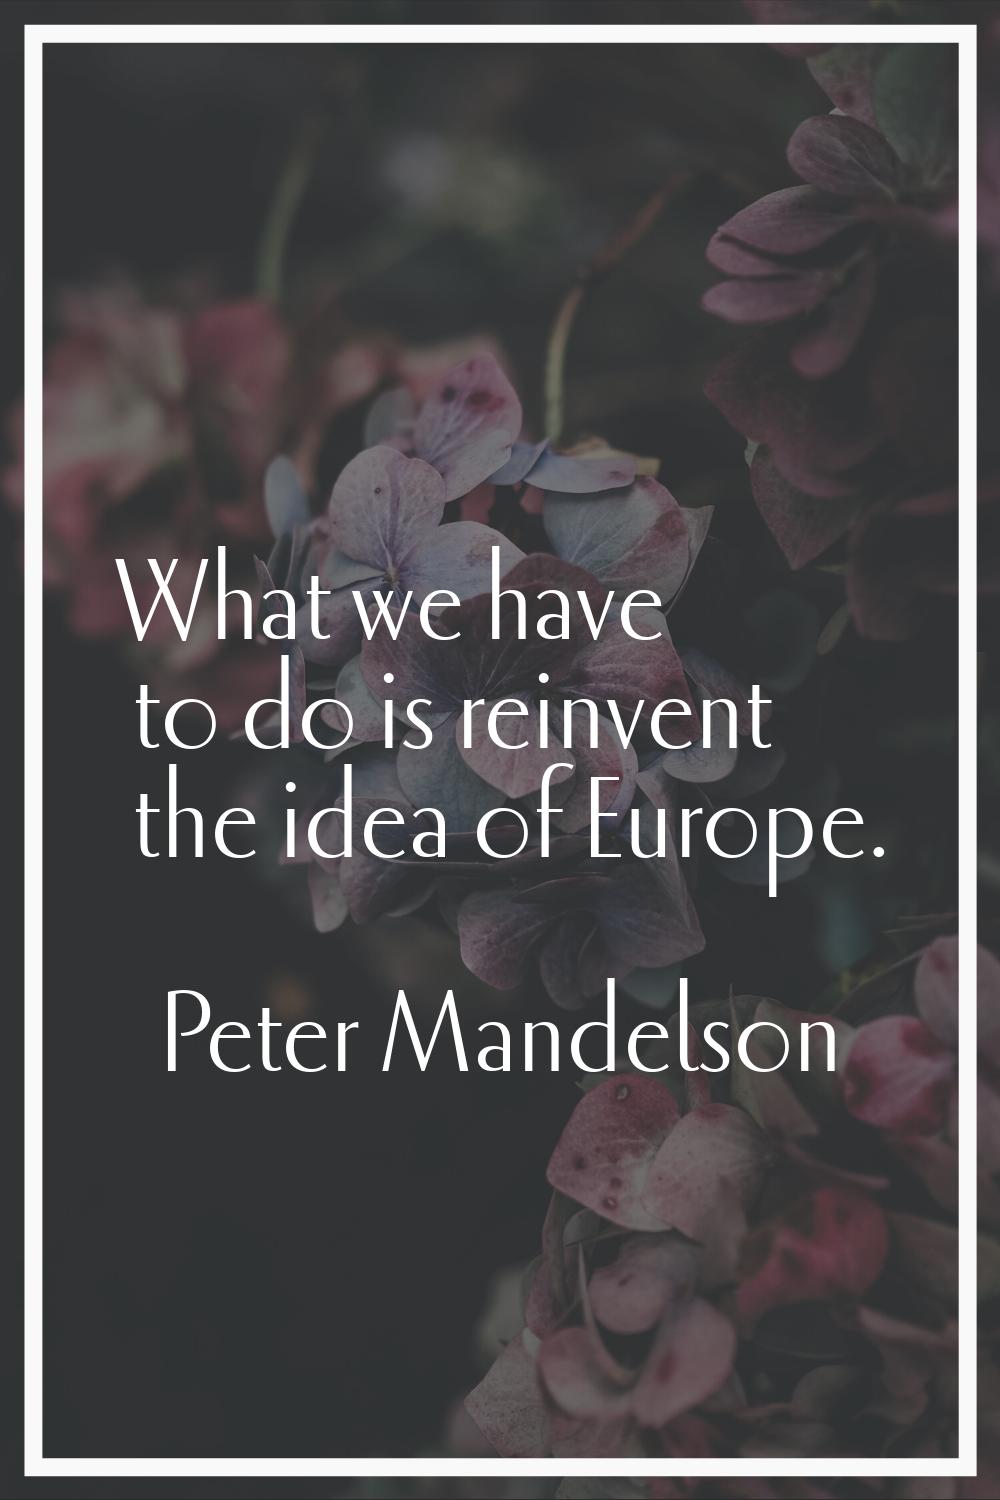 What we have to do is reinvent the idea of Europe.